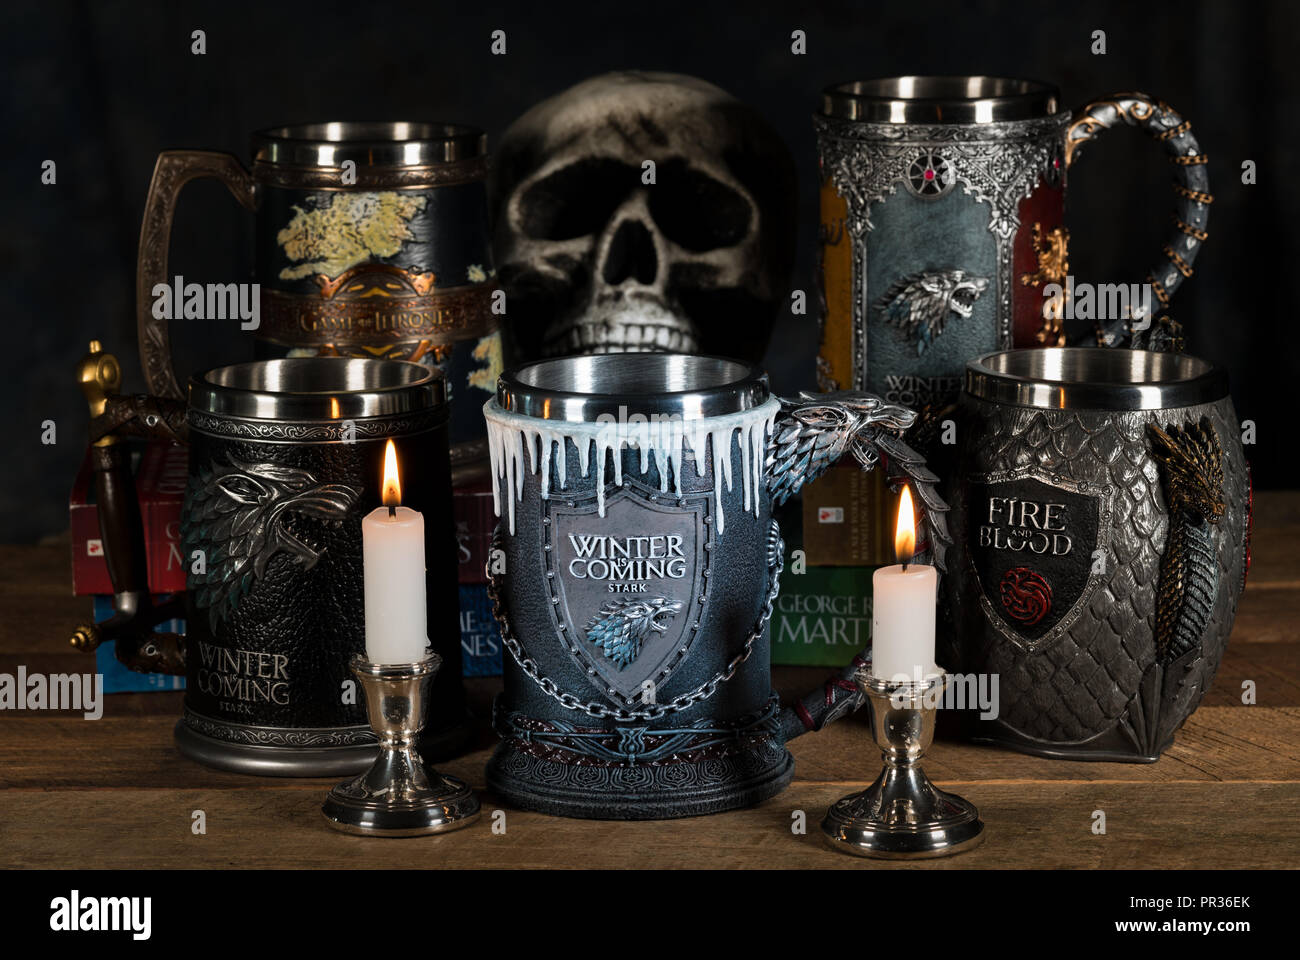 Official House Stark tankard from Game of Thrones series lit by candlelight Stock Photo